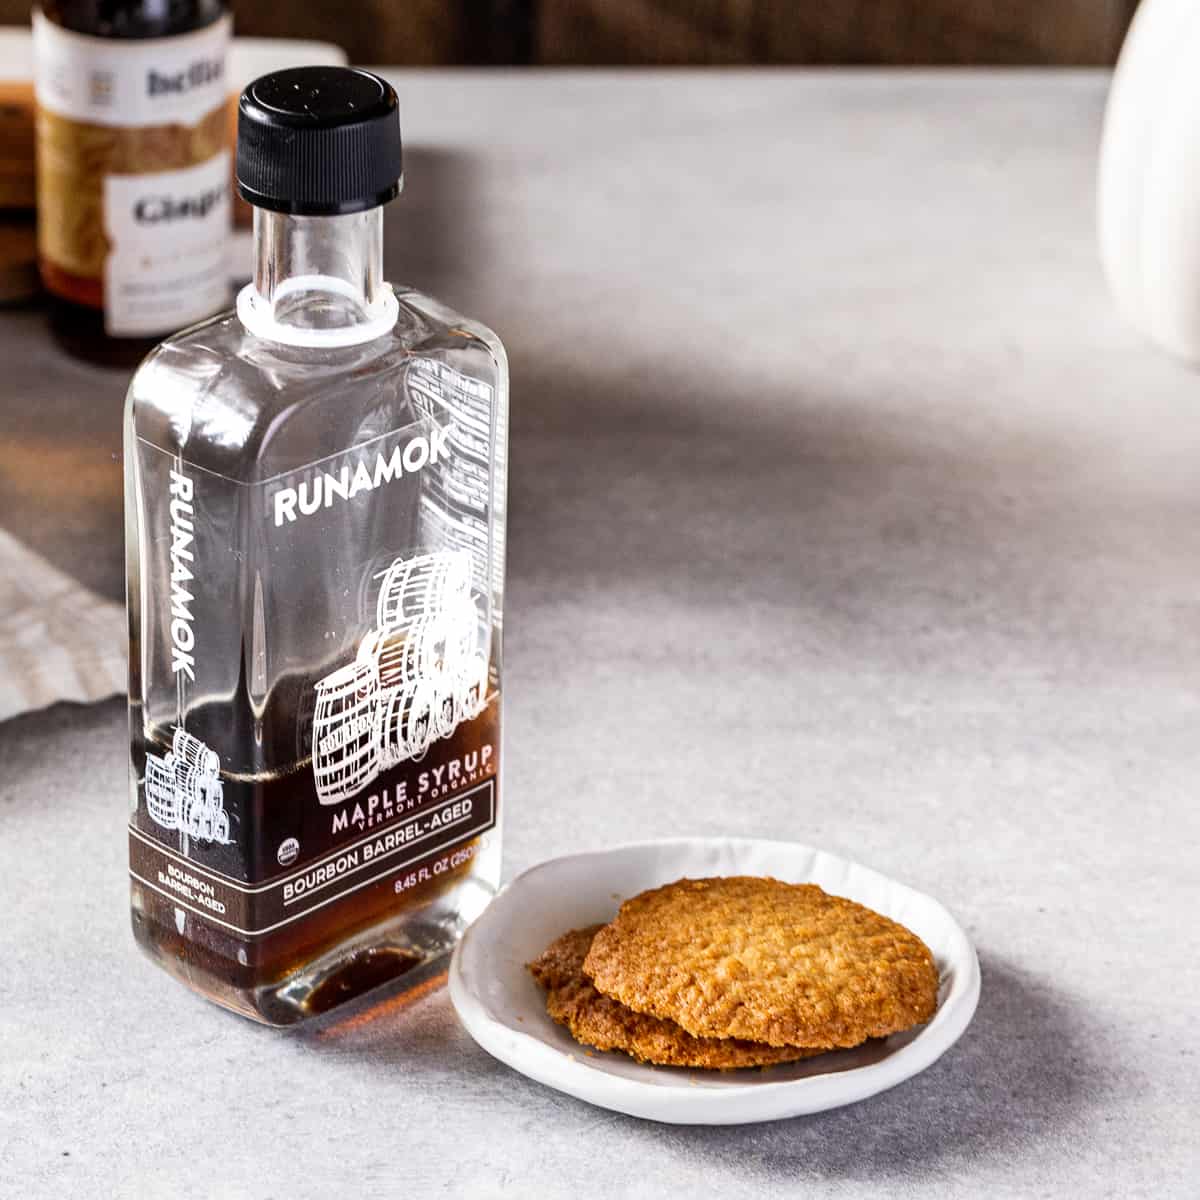 Maple syrup and a dish of cookies together on a countertop.